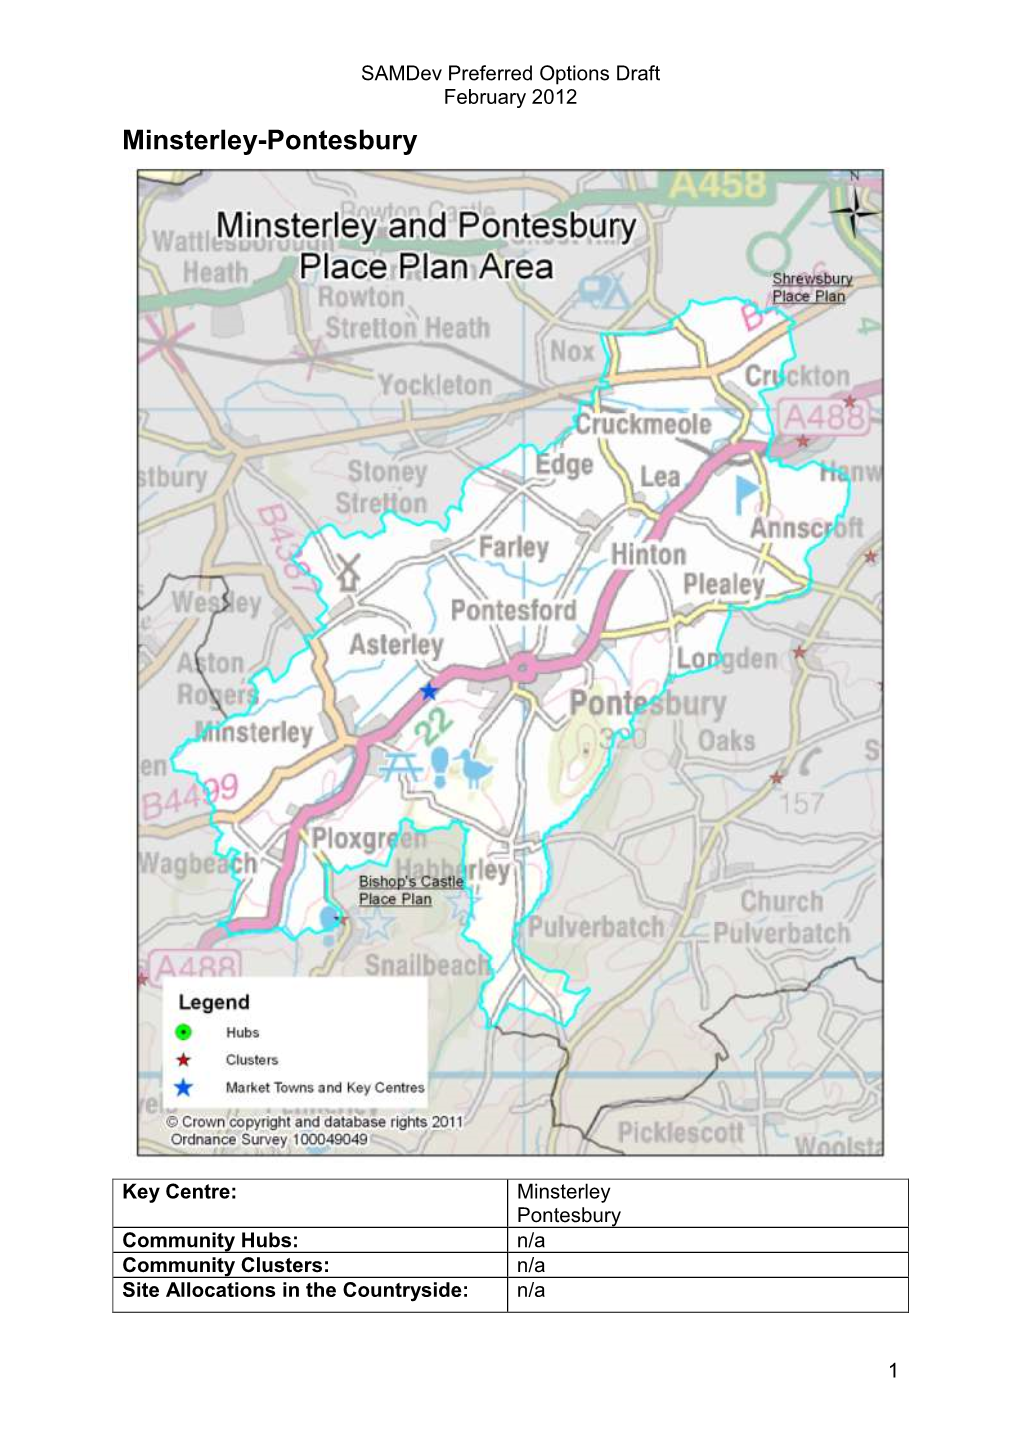 Key Centre: Minsterley Pontesbury Community Hubs: N/A Community Clusters: N/A Site Allocations in the Countryside: N/A